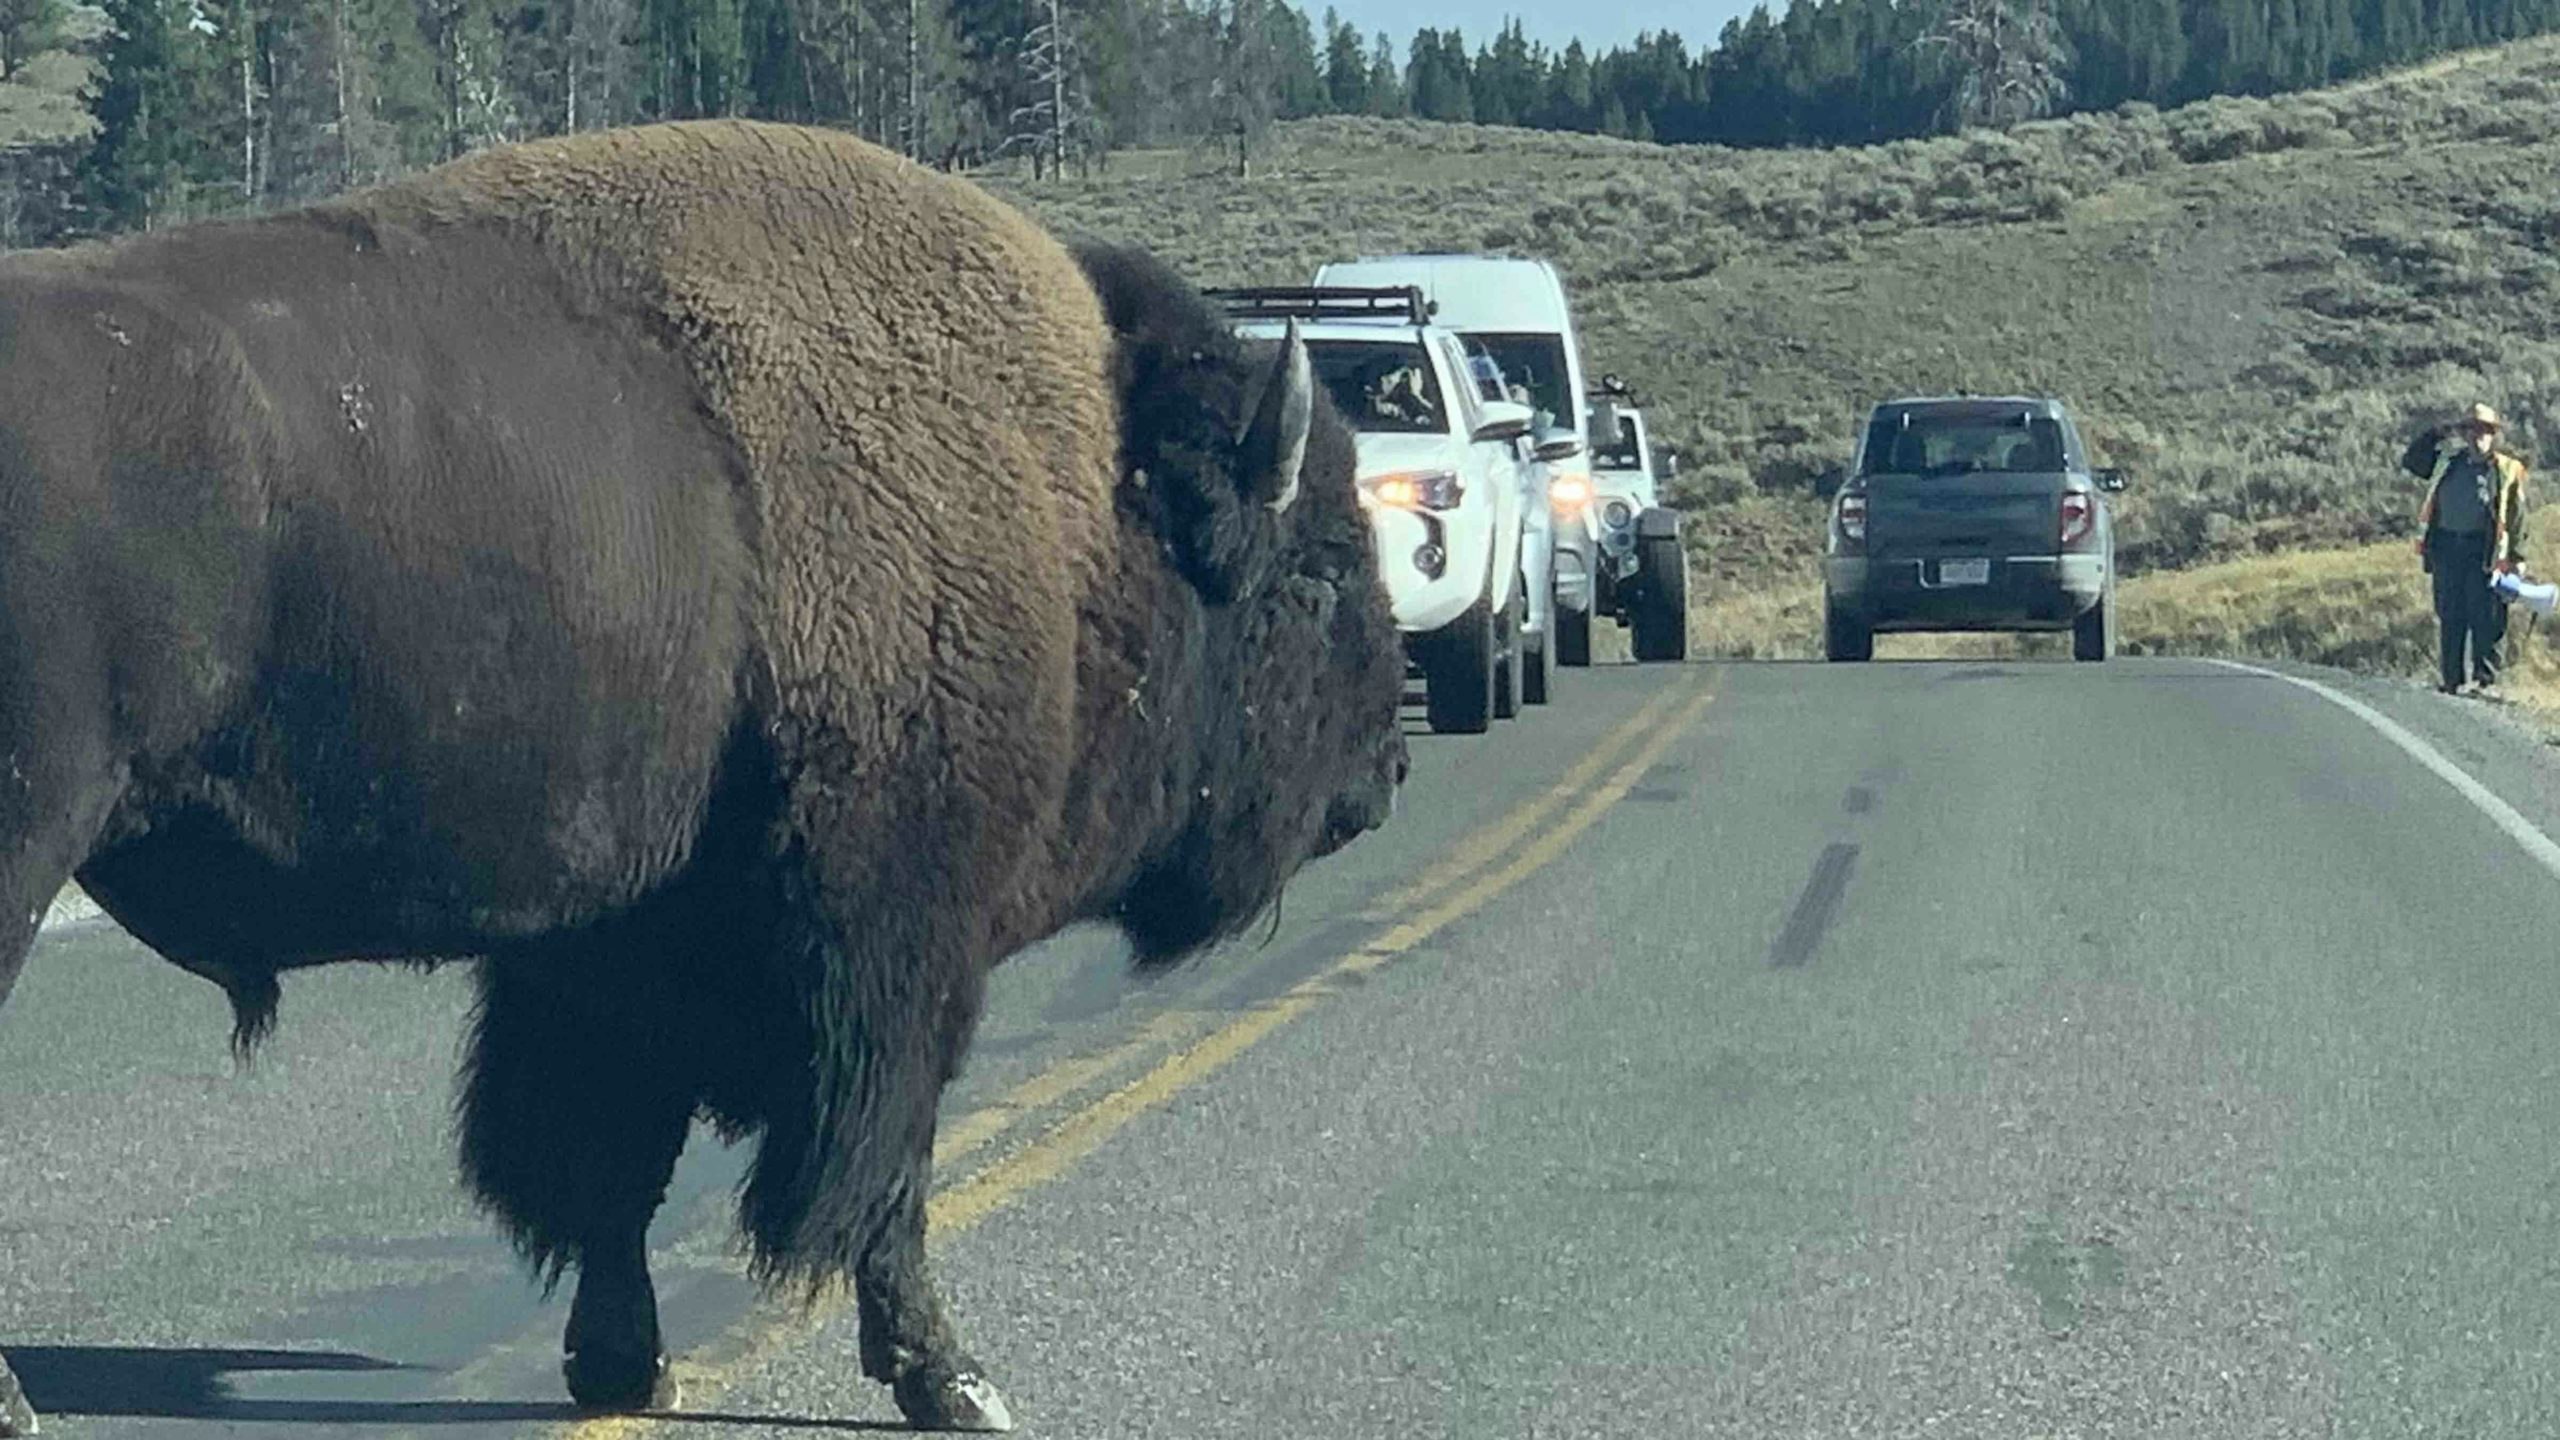 Sniffin bison scaled